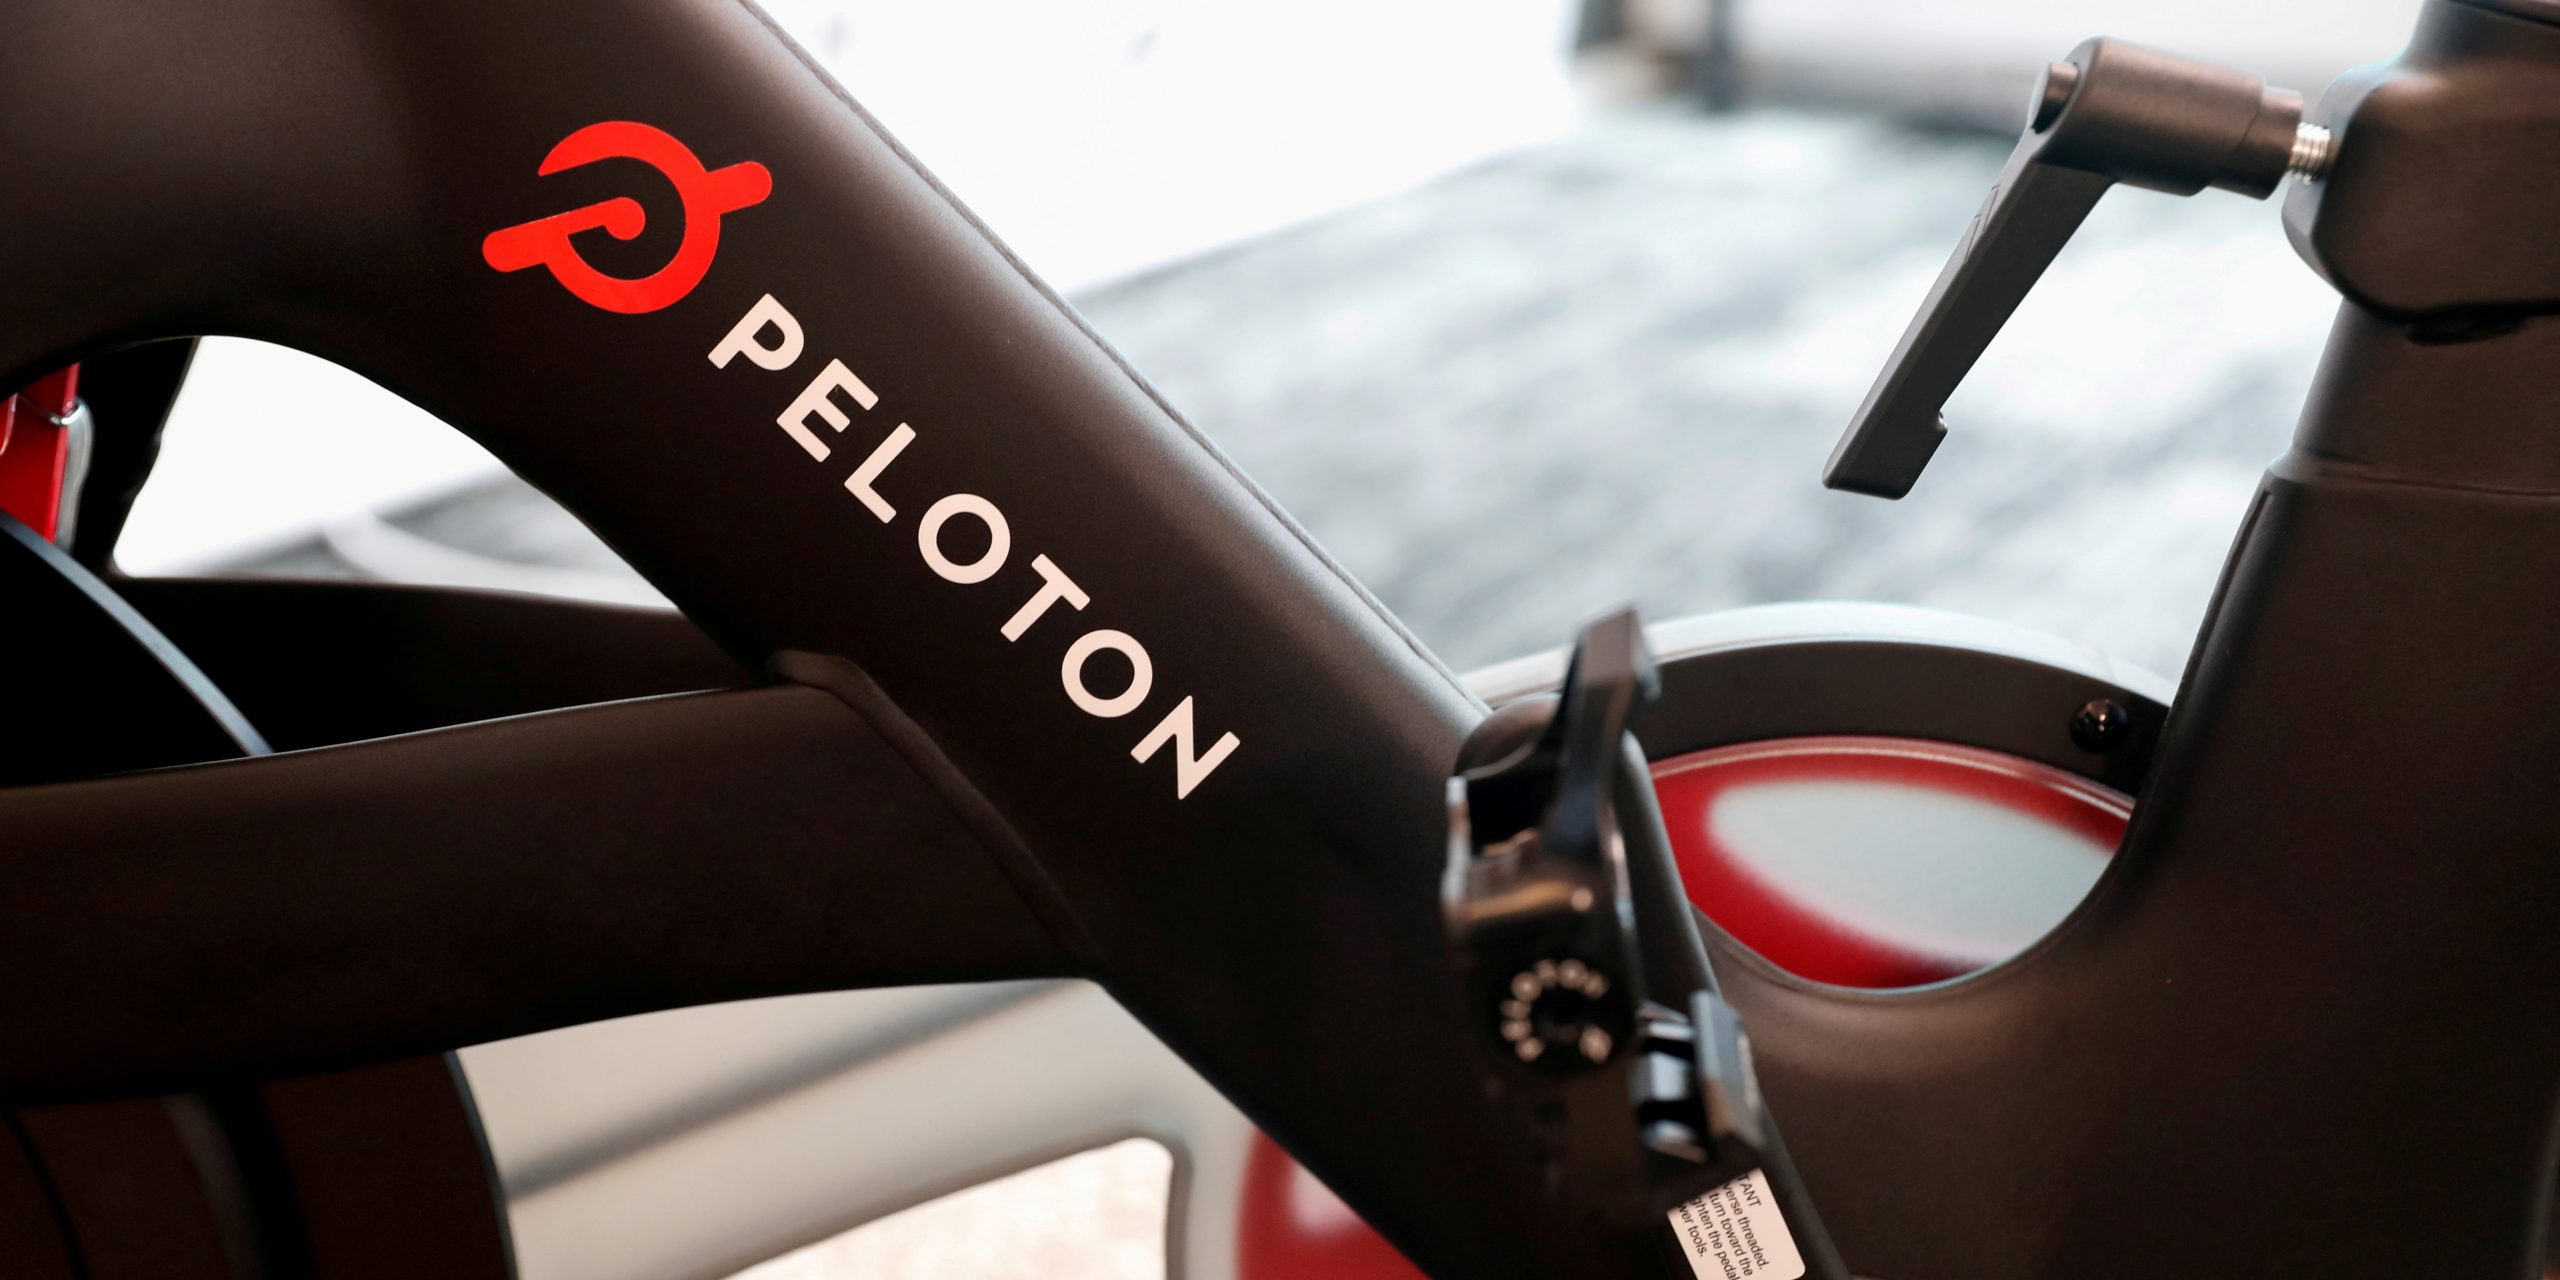 A Peloton exercise bike is seen after the ringing of the opening bell for the company's IPO at the Nasdaq Market site in New York City, New York, U.S., September 26, 2019.